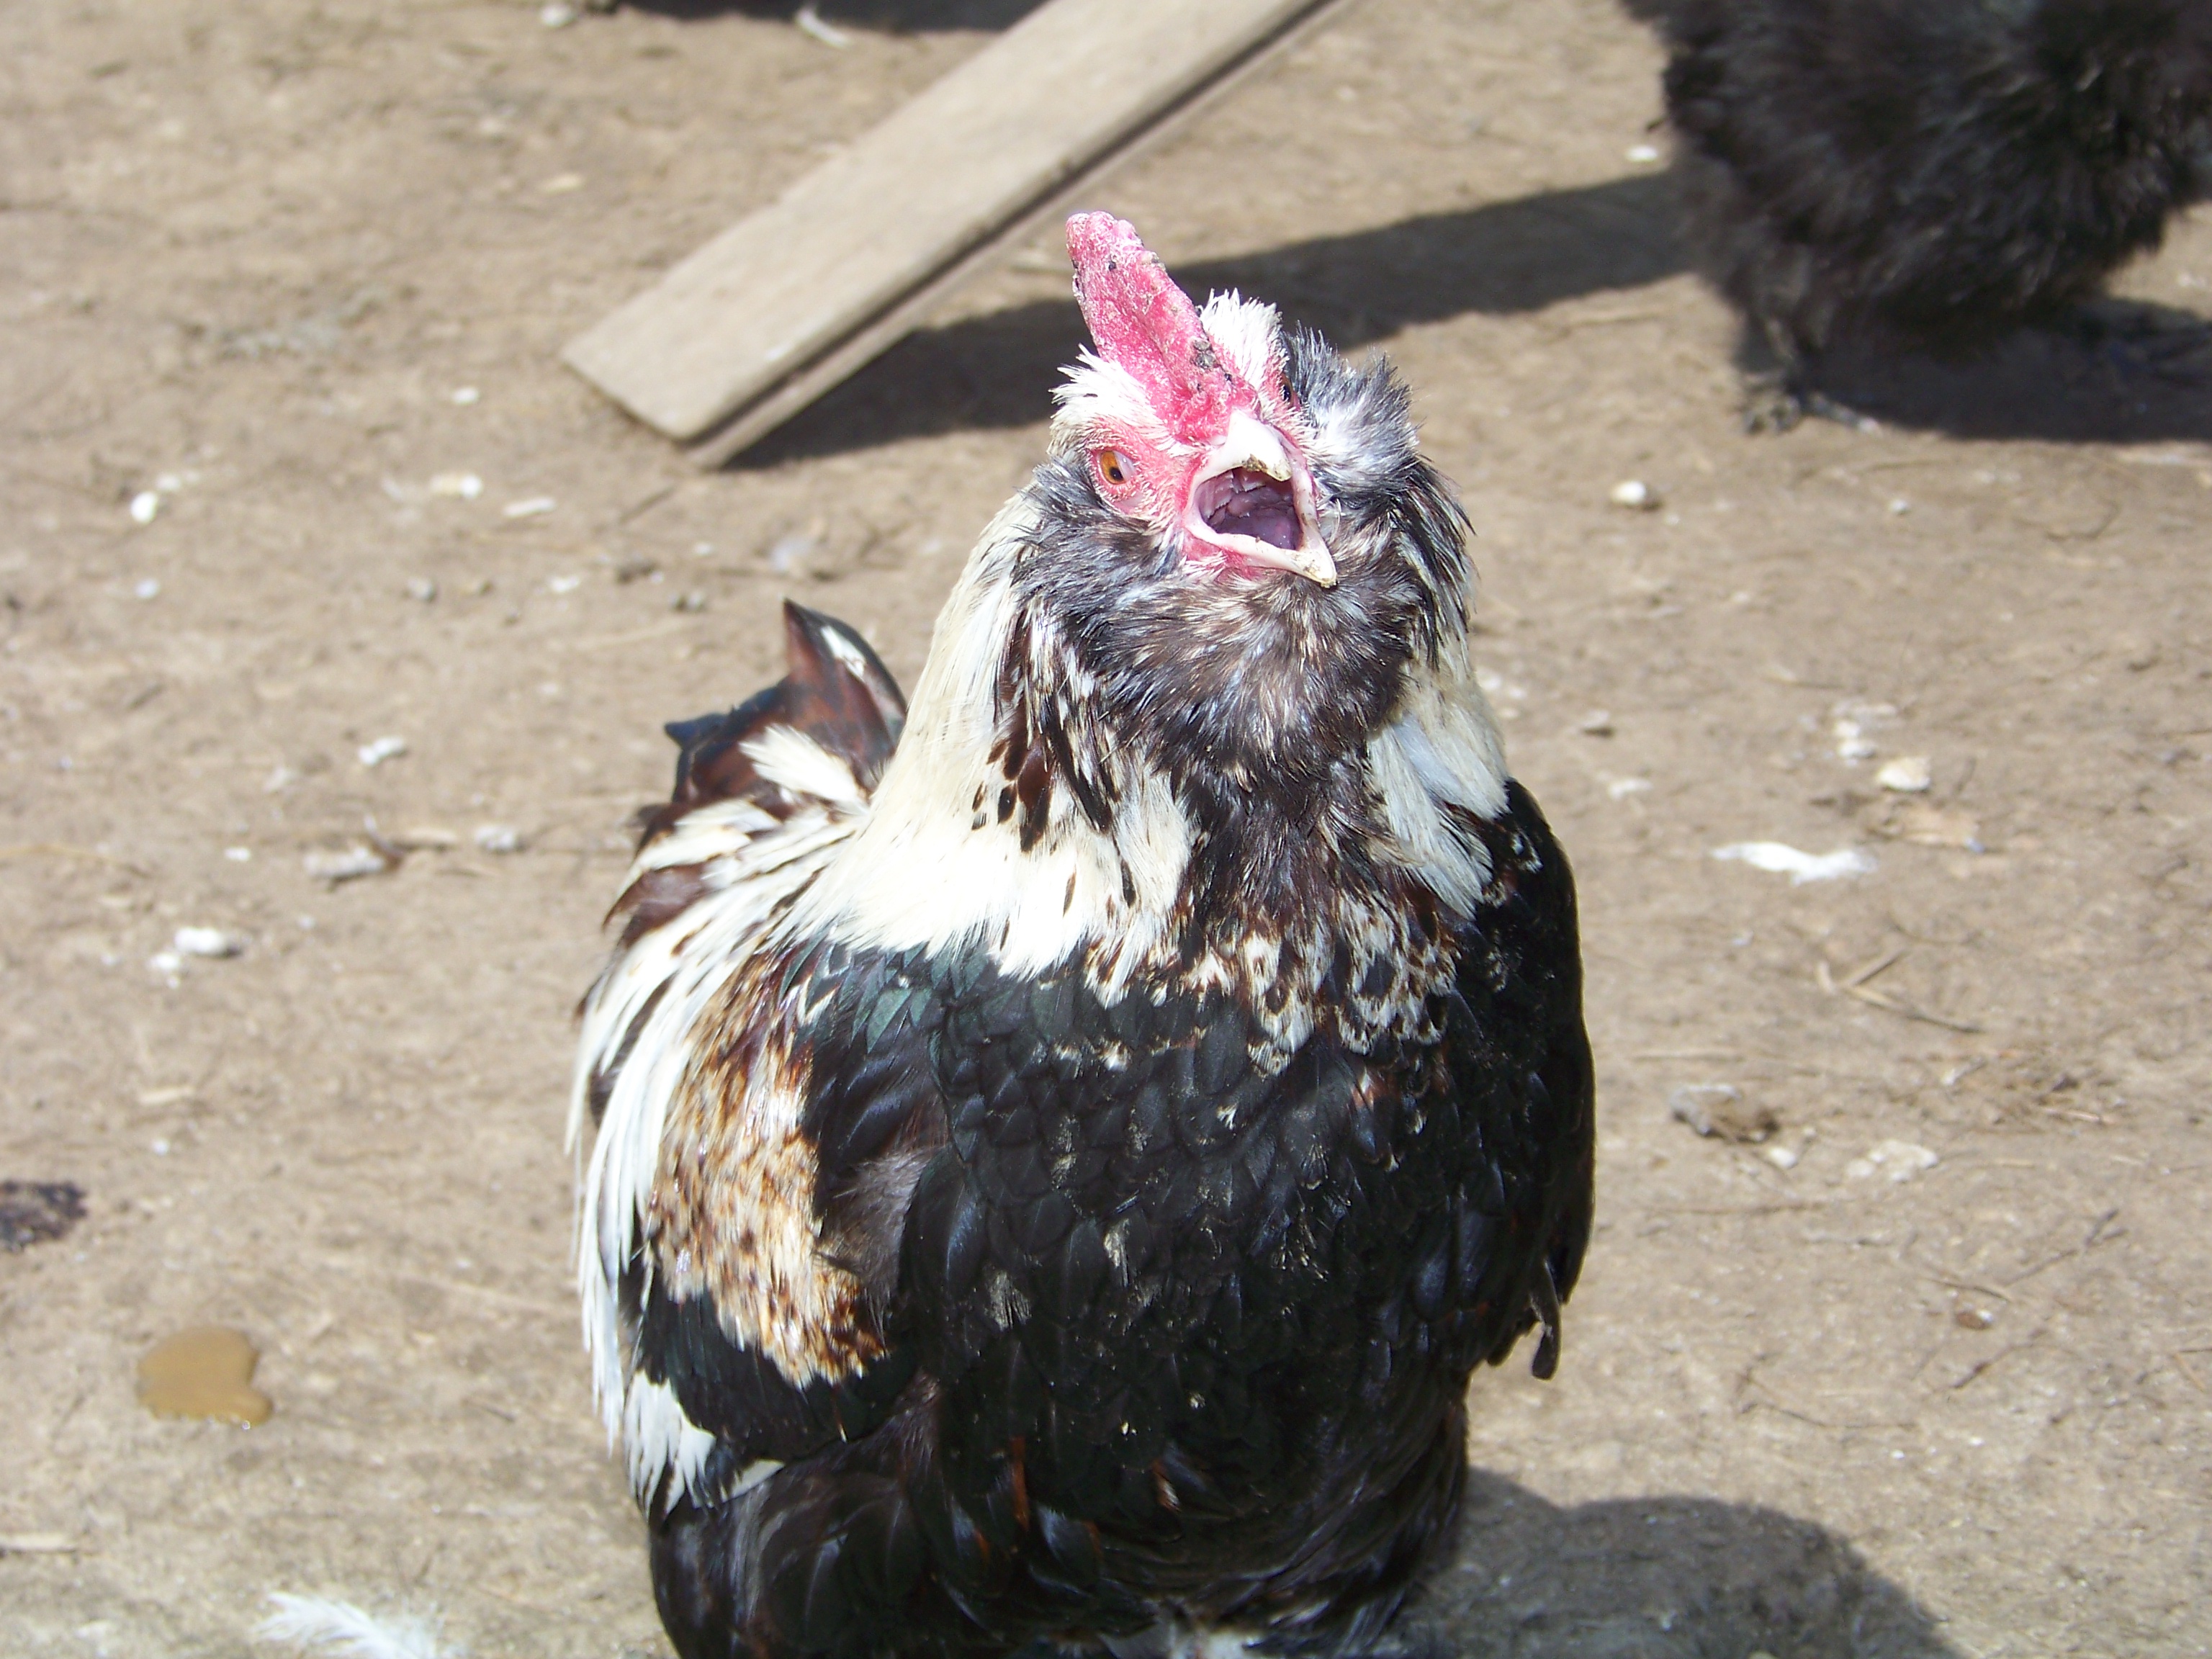 General (Salmon Faverolles bantam roo) doing his manly duty.